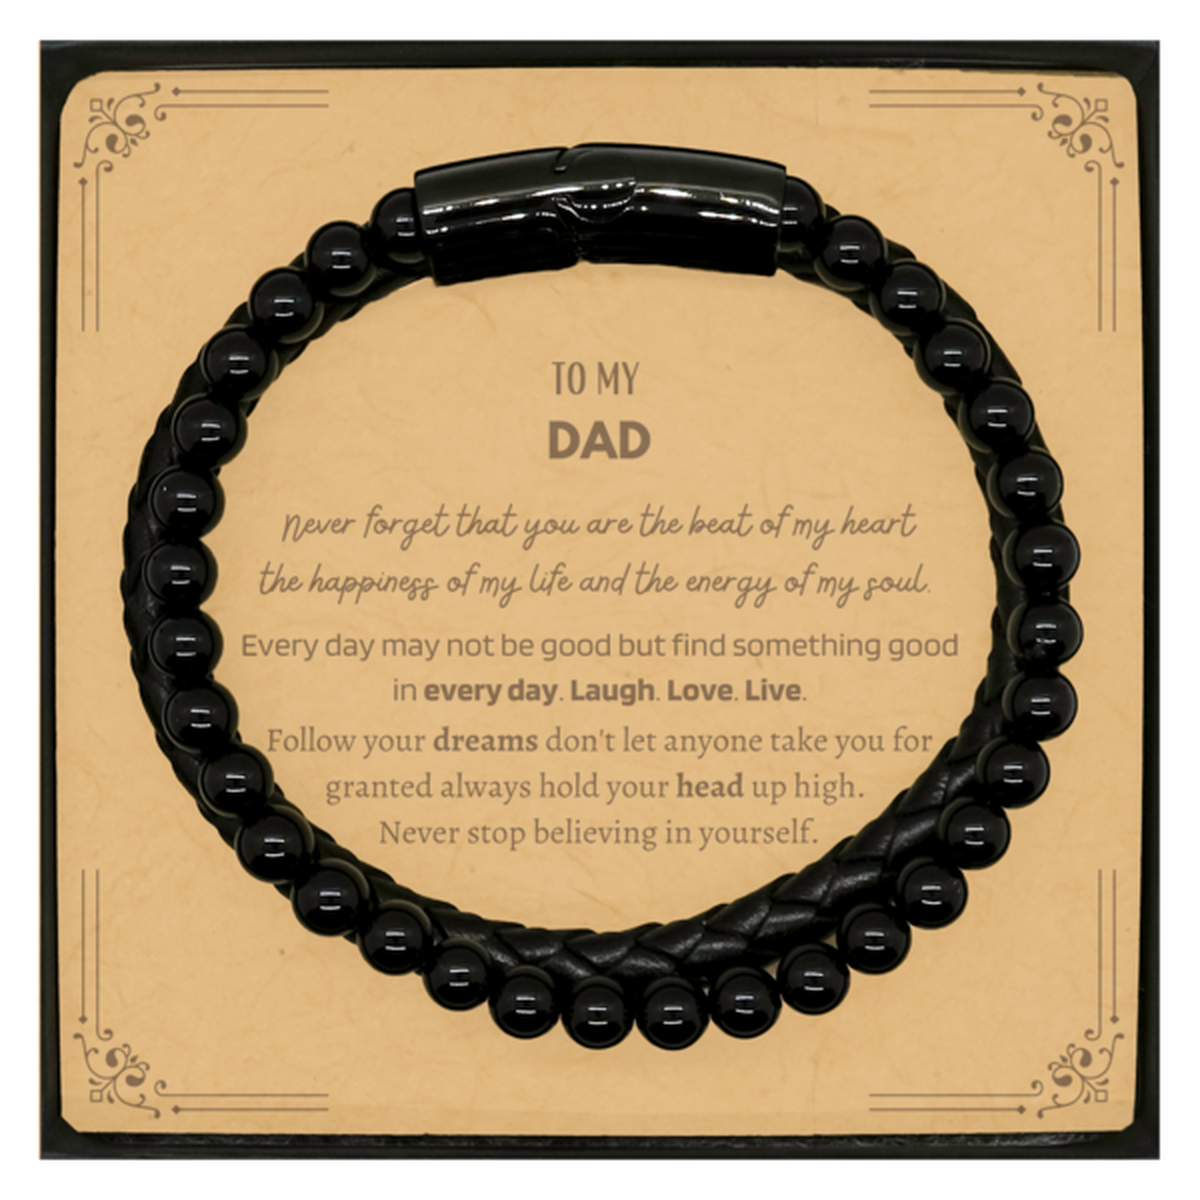 To My Dad Message Card Gifts, Christmas Dad Stone Leather Bracelets Present, Birthday Unique Motivational For Dad, To My Dad Never forget that you are the beat of my heart the happiness of my life and the energy of my soul